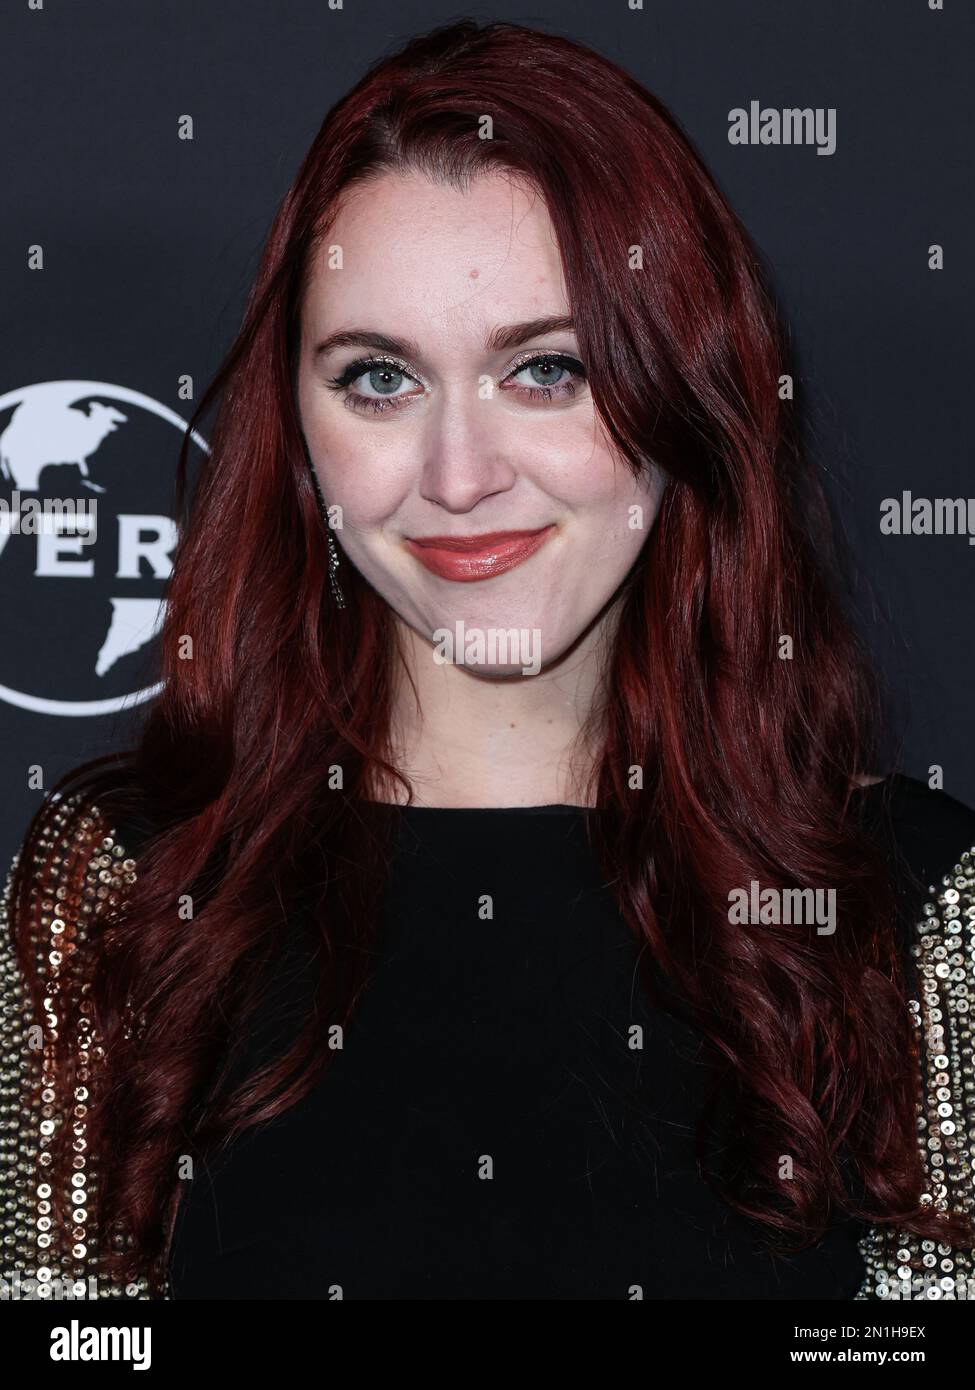 LOS ANGELES, CALIFORNIA, USA - FEBRUARY 05: Em Beihold arrives at the Universal Music Group 2023 65th GRAMMY Awards After Party held at Milk Studios Los Angeles on February 5, 2023 in Los Angeles, California, United States. (Photo by Xavier Collin/Image Press Agency) Stock Photo